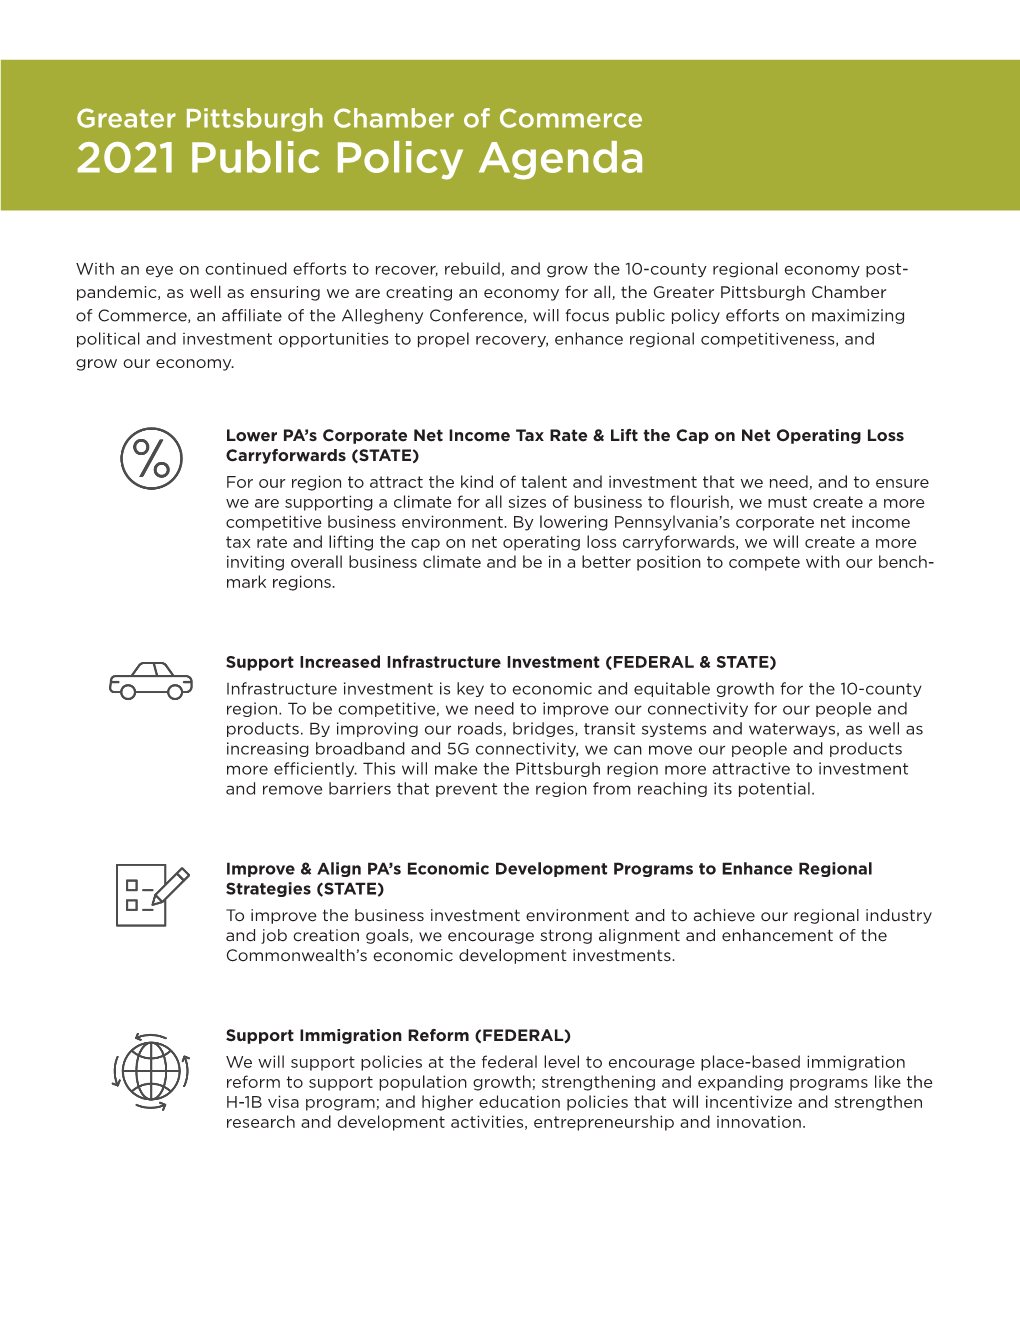 Download Our 2021 Public Policy Agenda